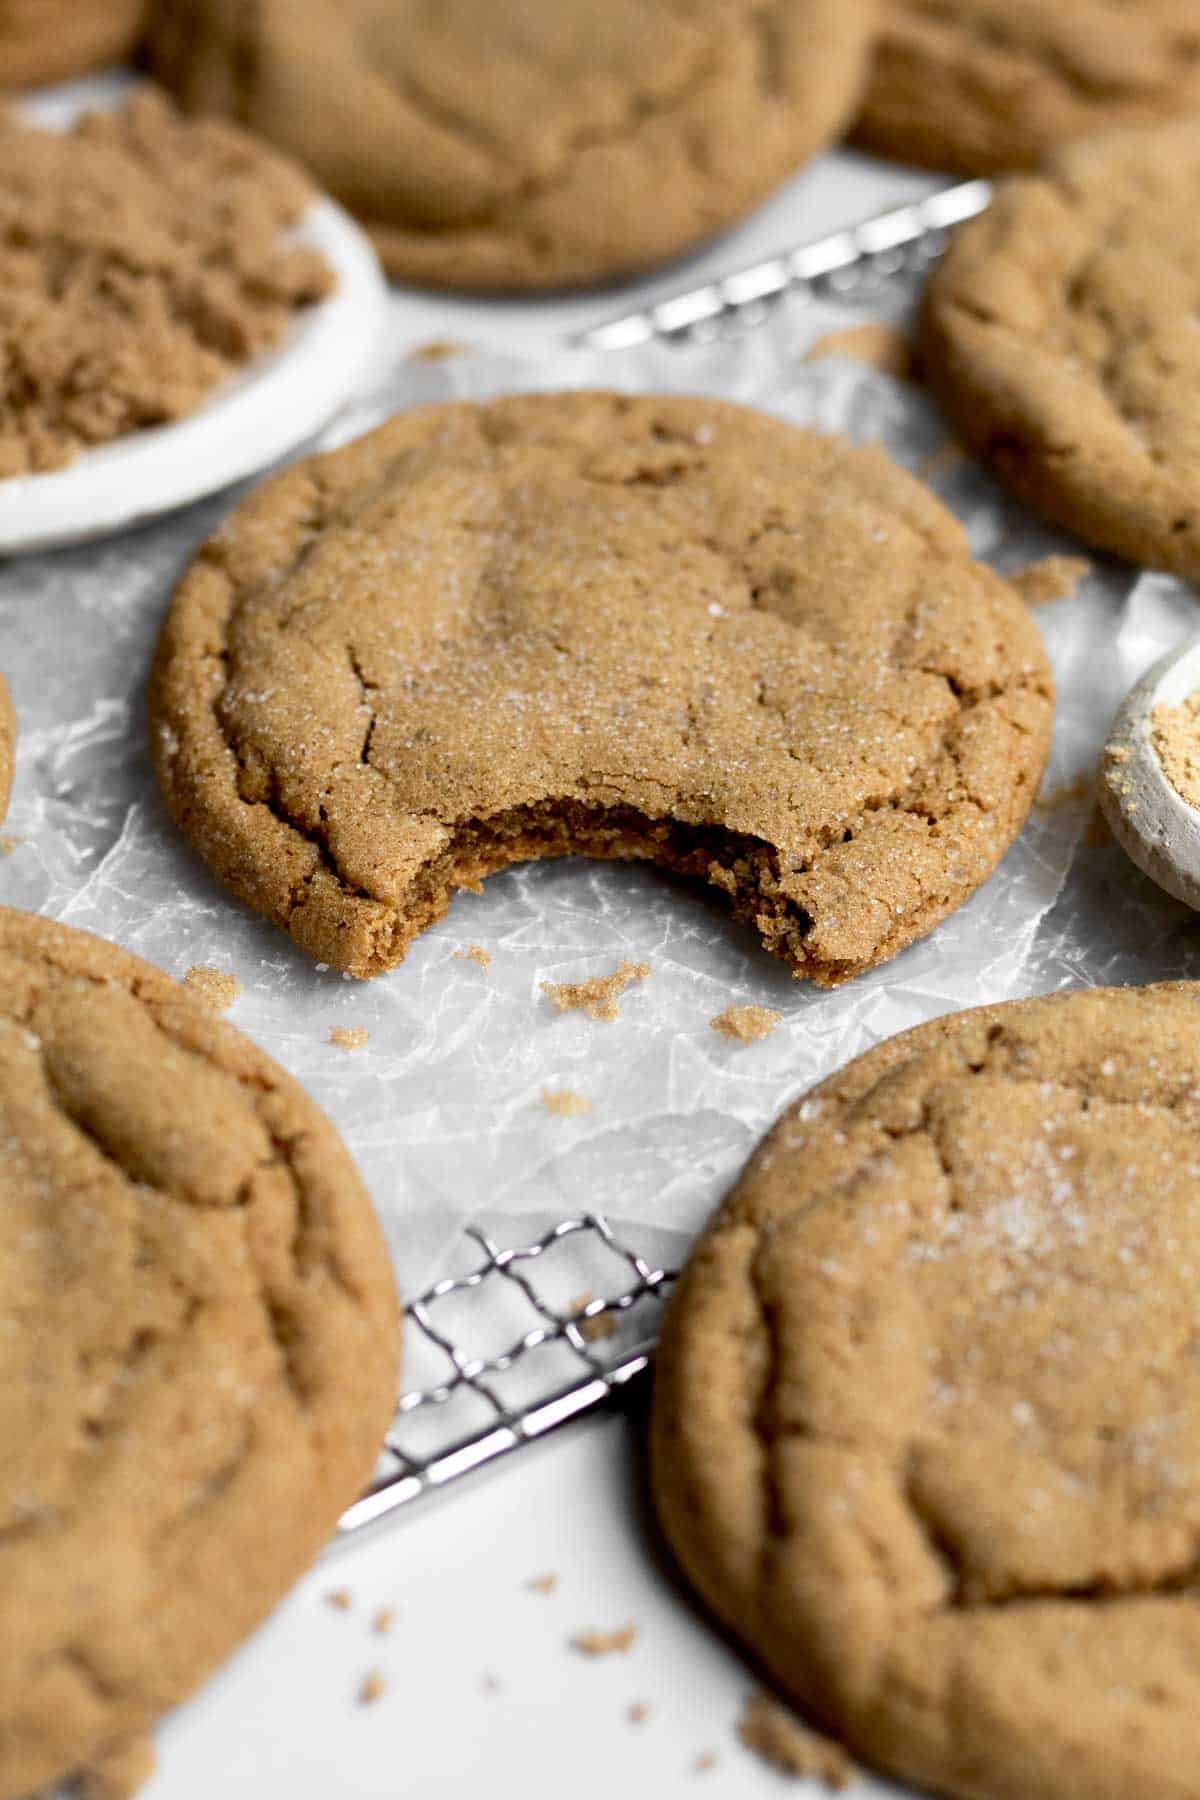 A bite through the Ginger Cookie’s crisp exterior and into the soft warm spiced center.